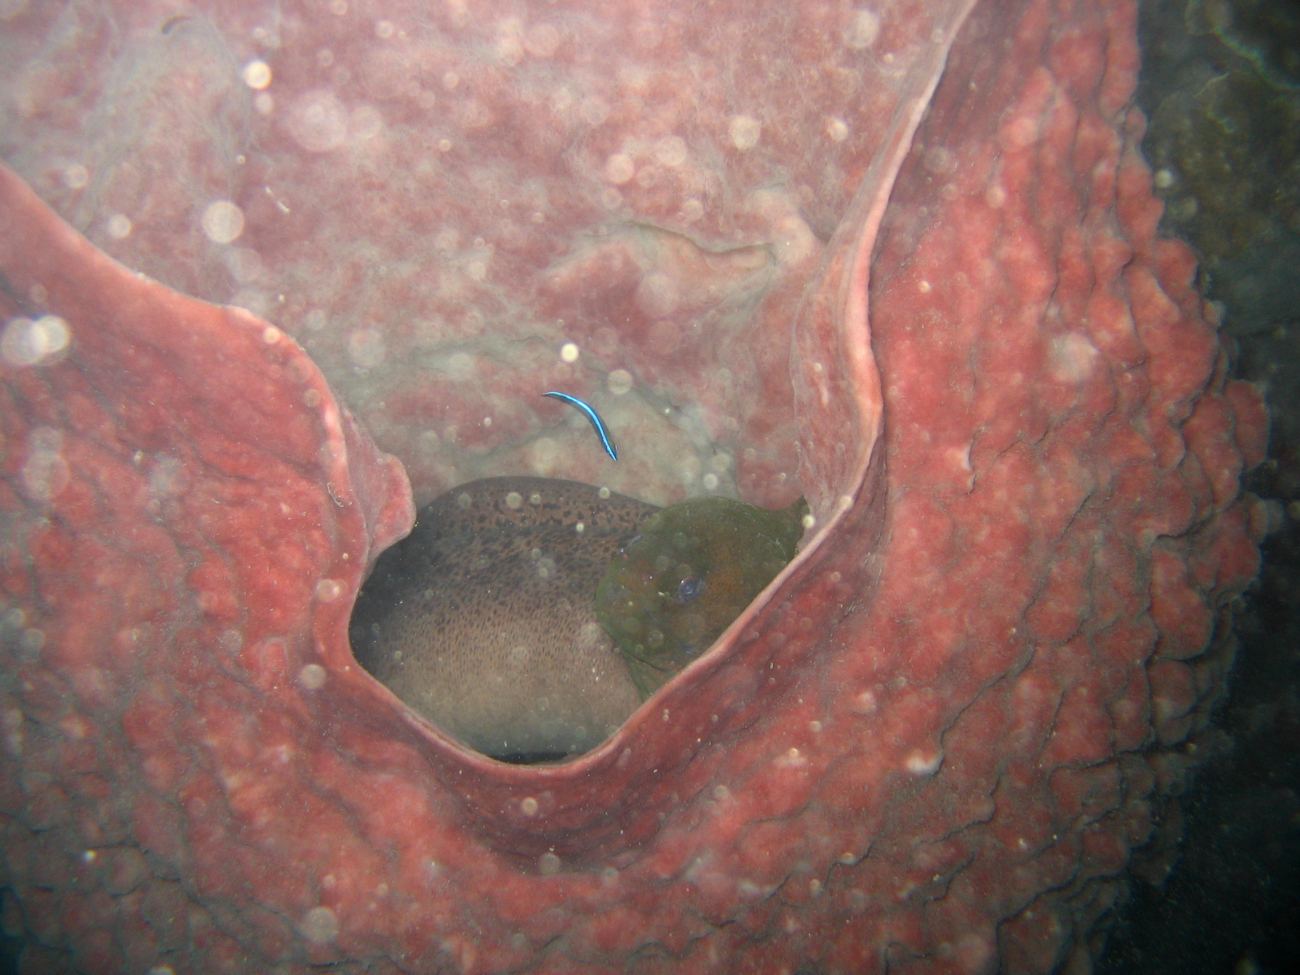 Giant moray eel with cleaner wrasses in red barrel sponge